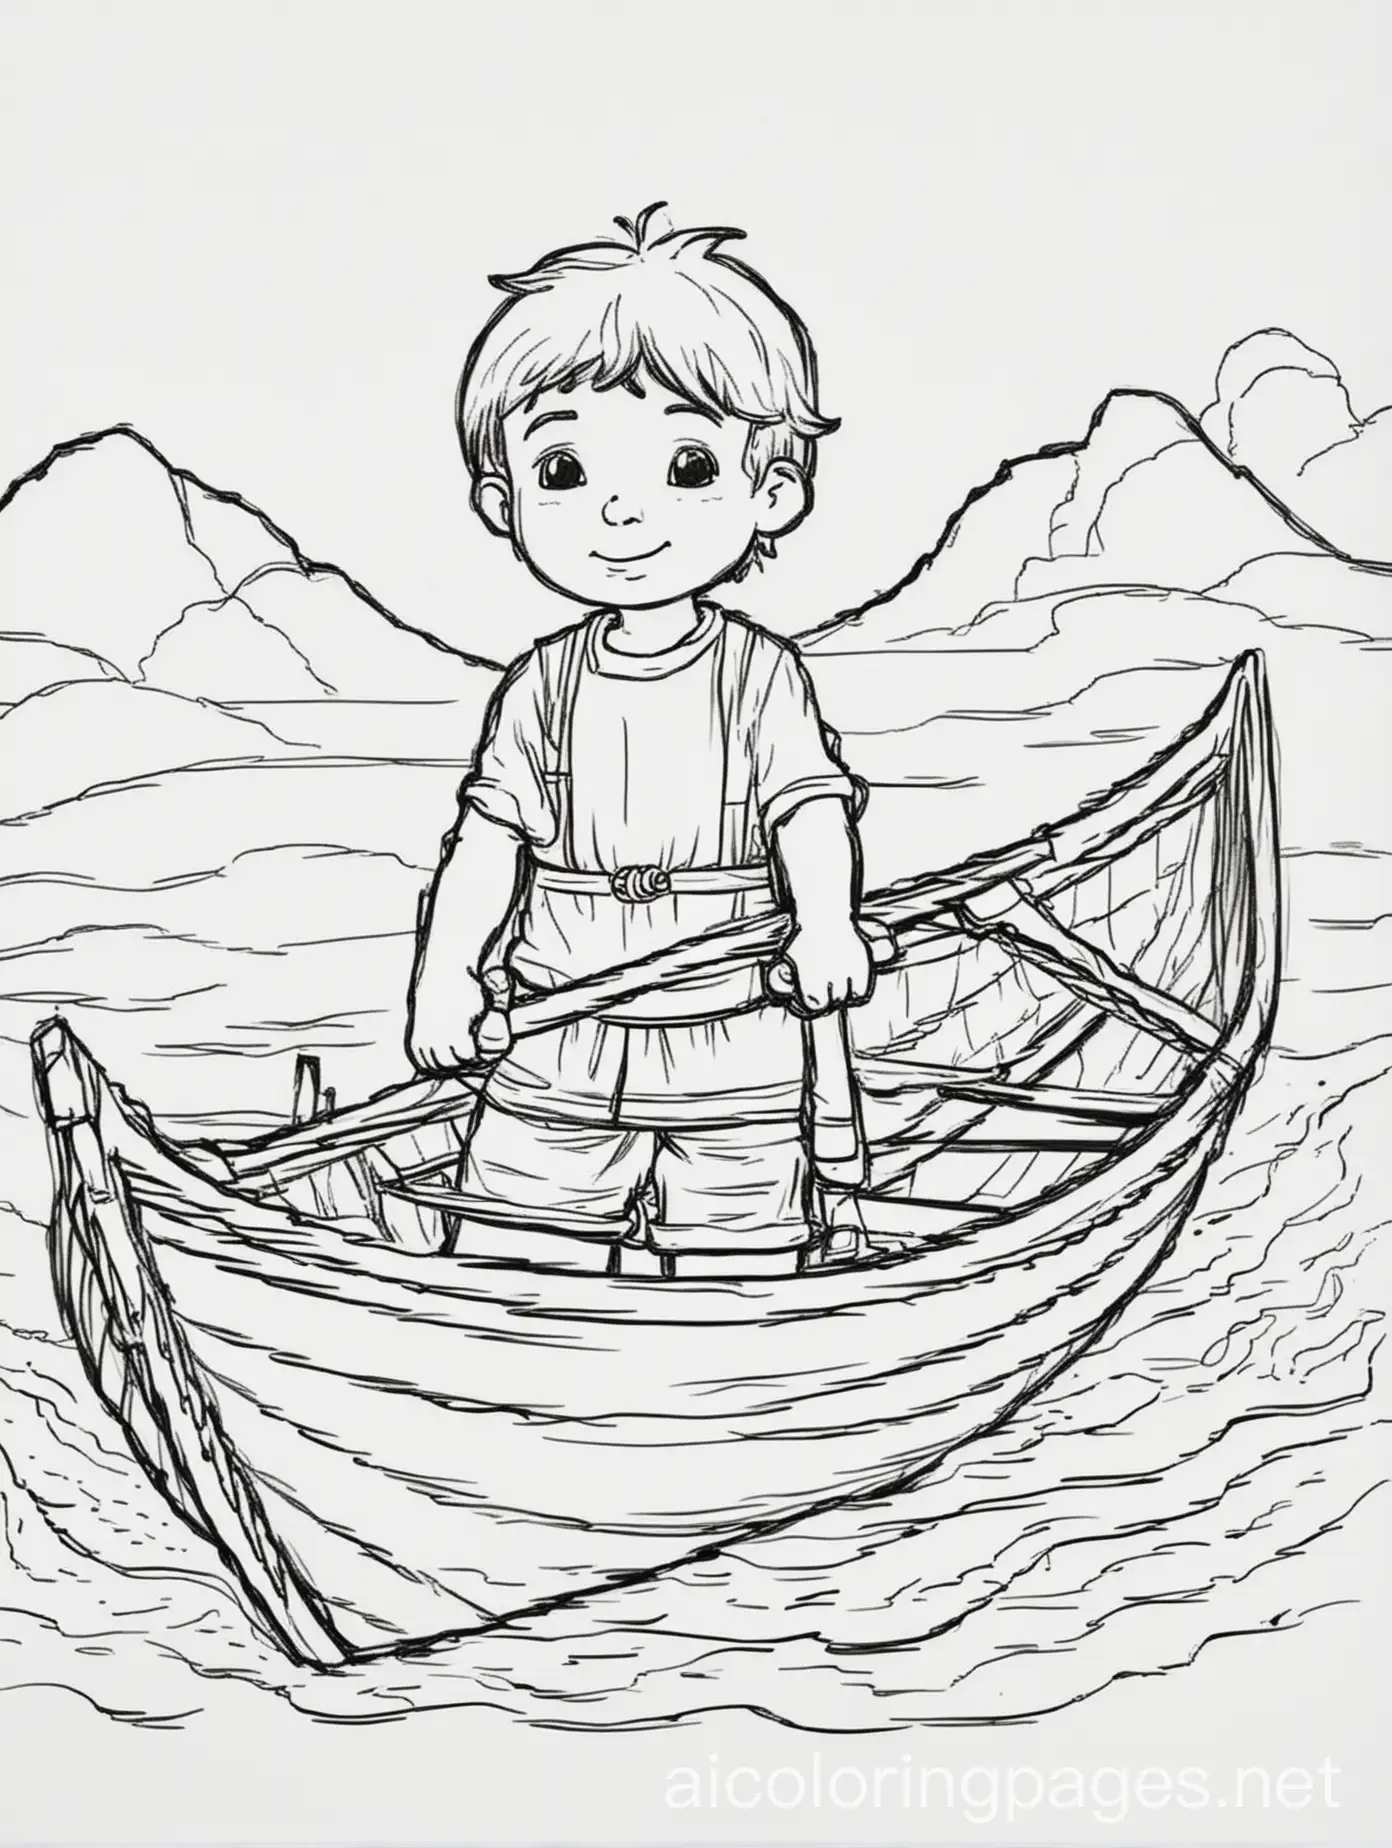 simple coloring page design of a boy in a row boat, Coloring Page, black and white, line art, white background, Simplicity, Ample White Space. The background of the coloring page is plain white to make it easy for young children to color within the lines. The outlines of all the subjects are easy to distinguish, making it simple for kids to color without too much difficulty